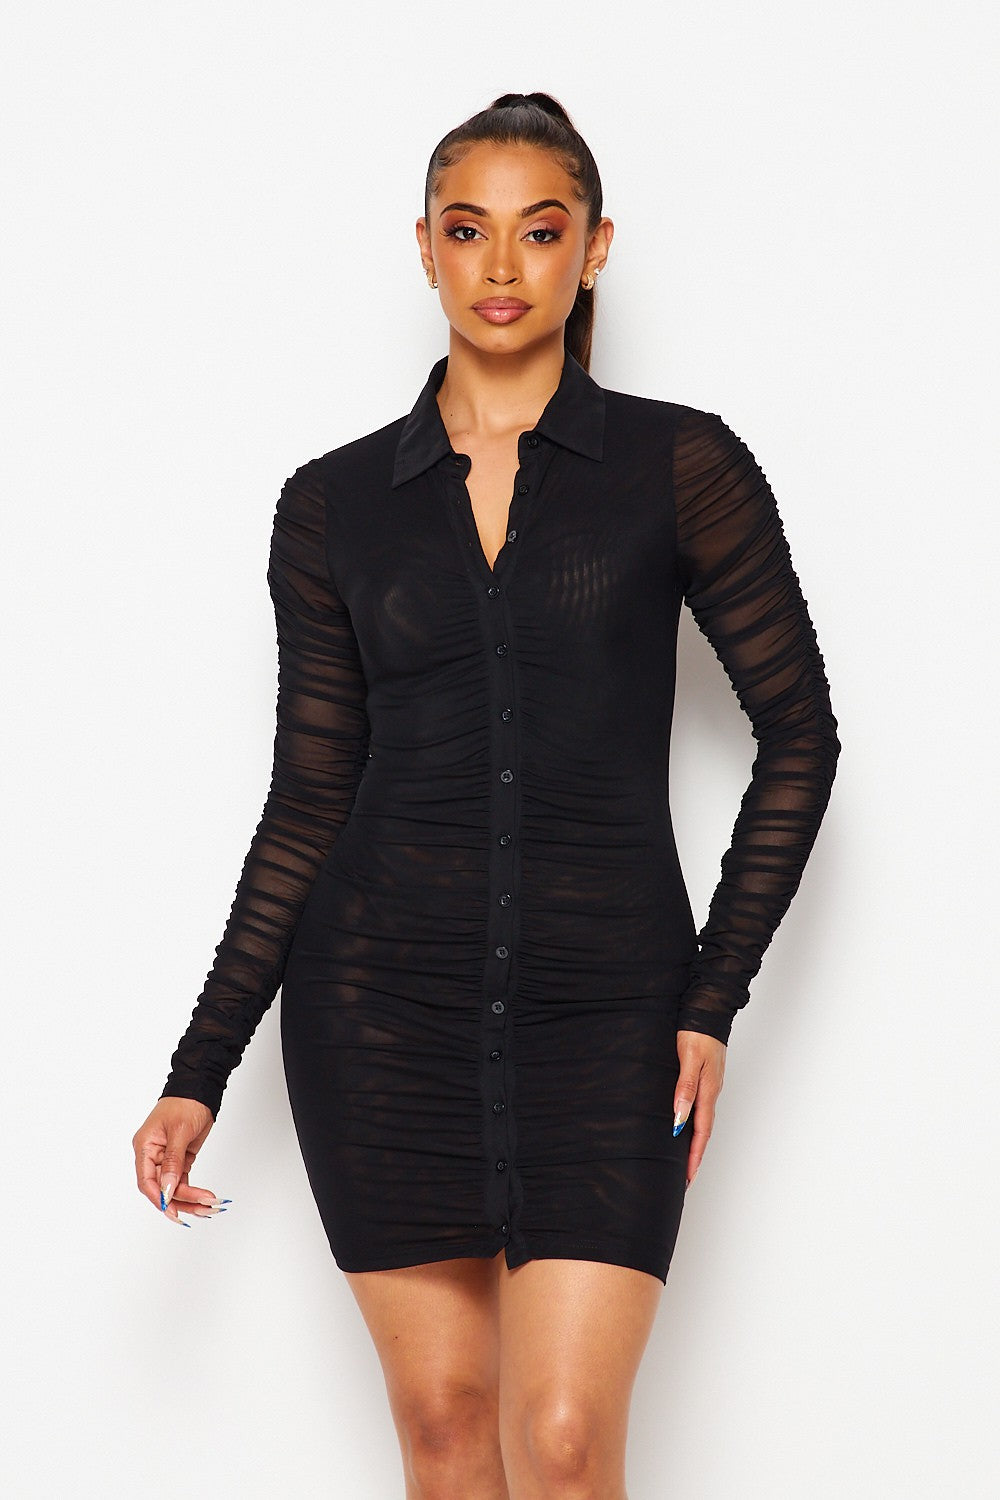 Deep In My Daydreams Collared Ruched Mesh Dress